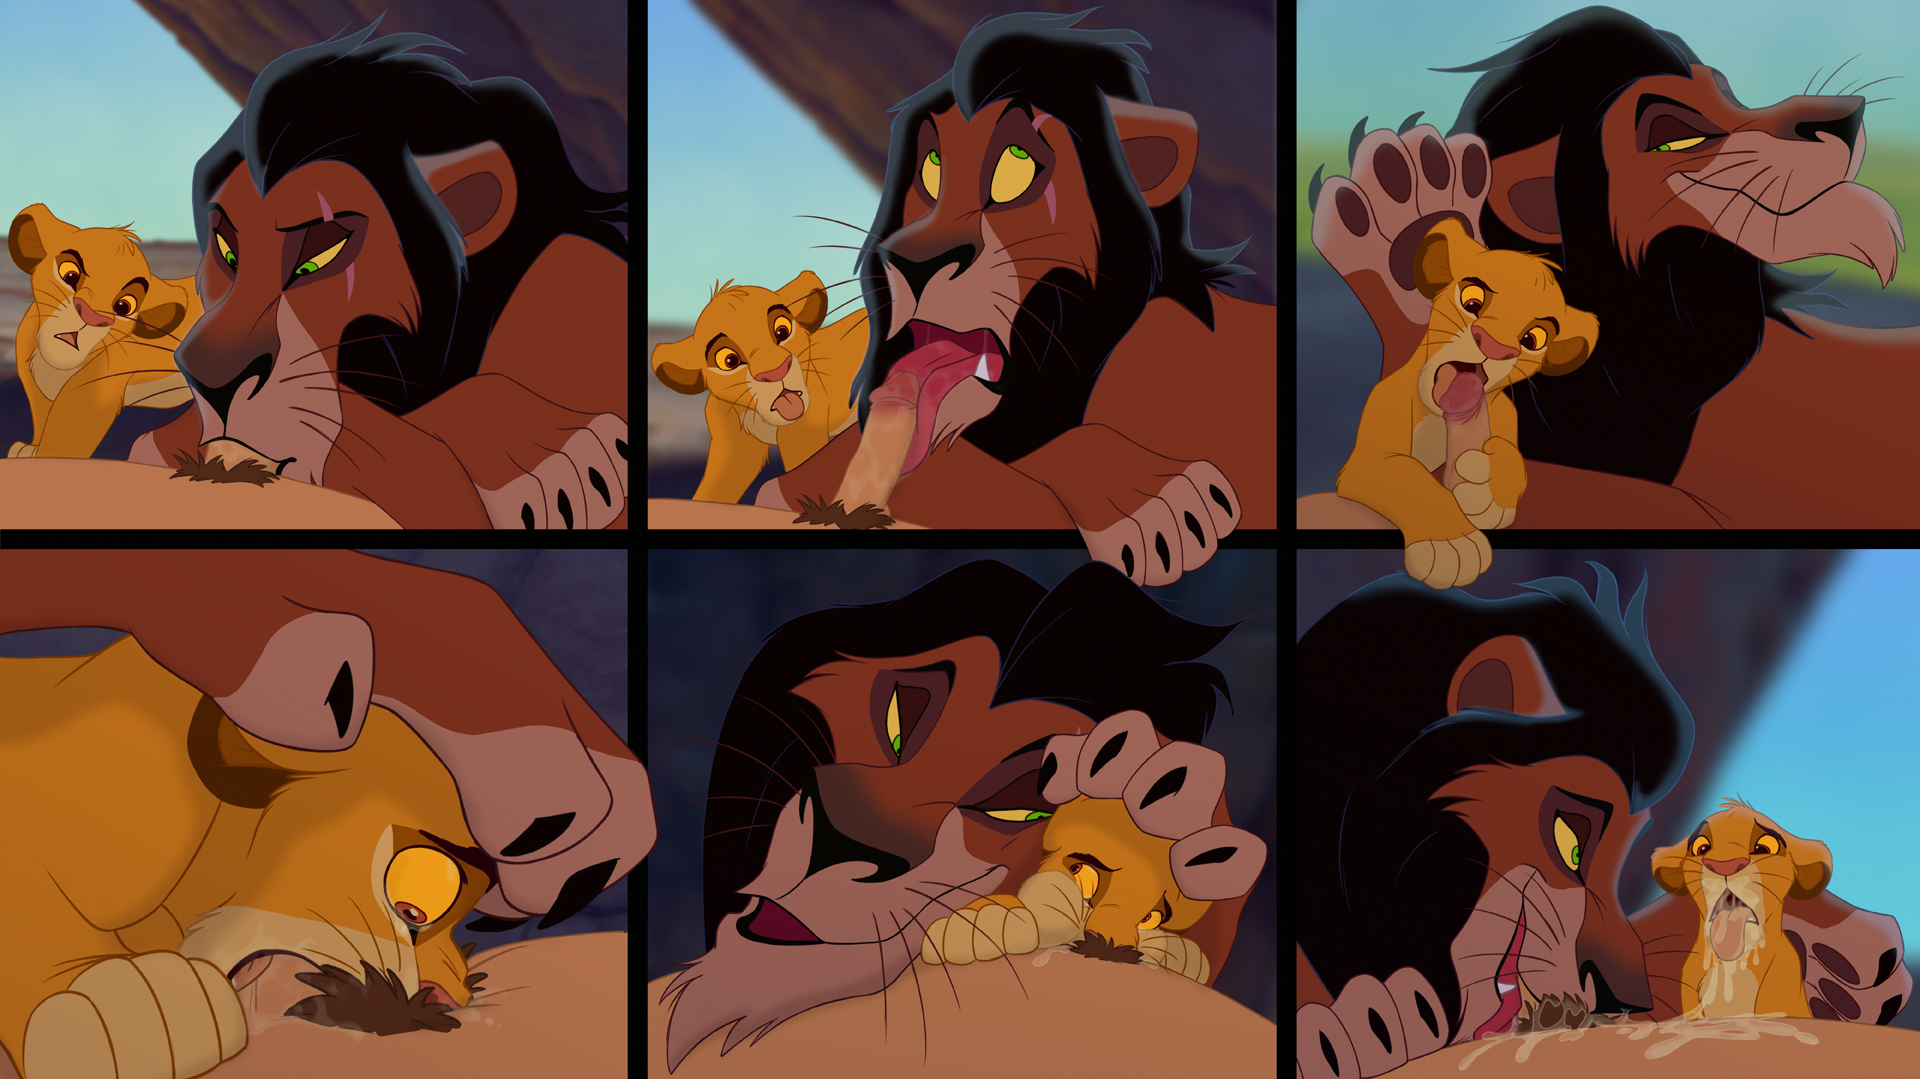 1946860%20-%20Scar%20Simba%20TheGiantHamster%20The_Lion_King.png.